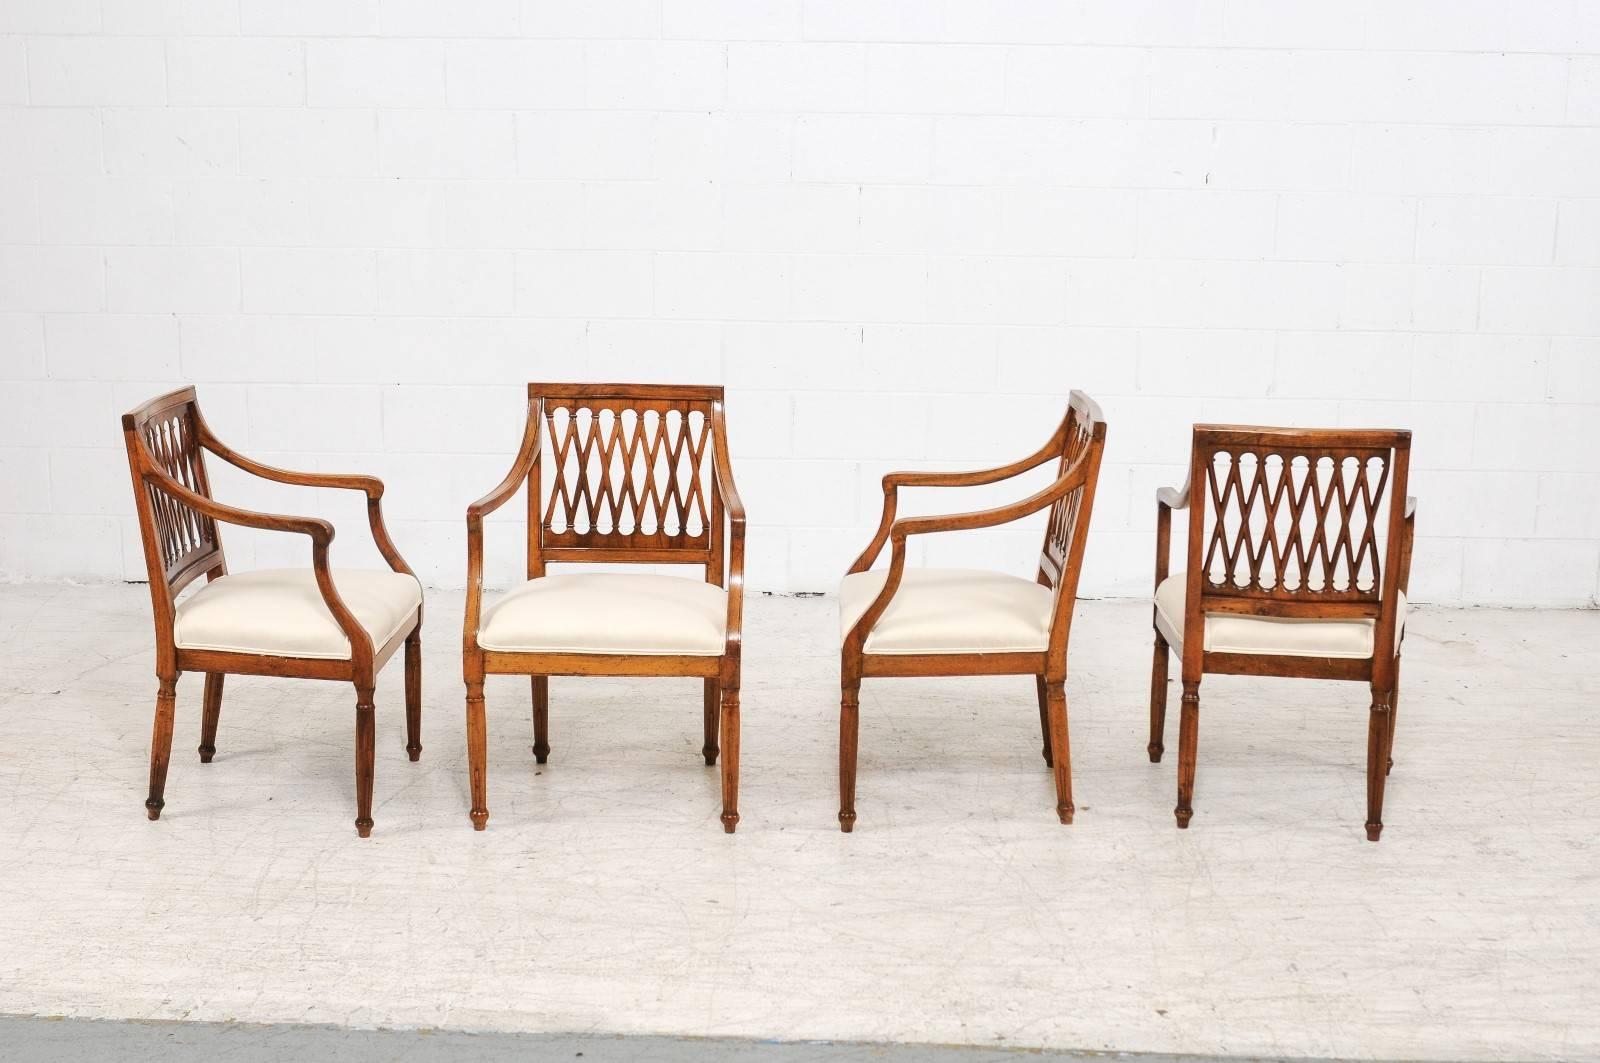 Set of Four Italian Vintage Upholstered Chairs with Latticed Backs, circa 1930 5